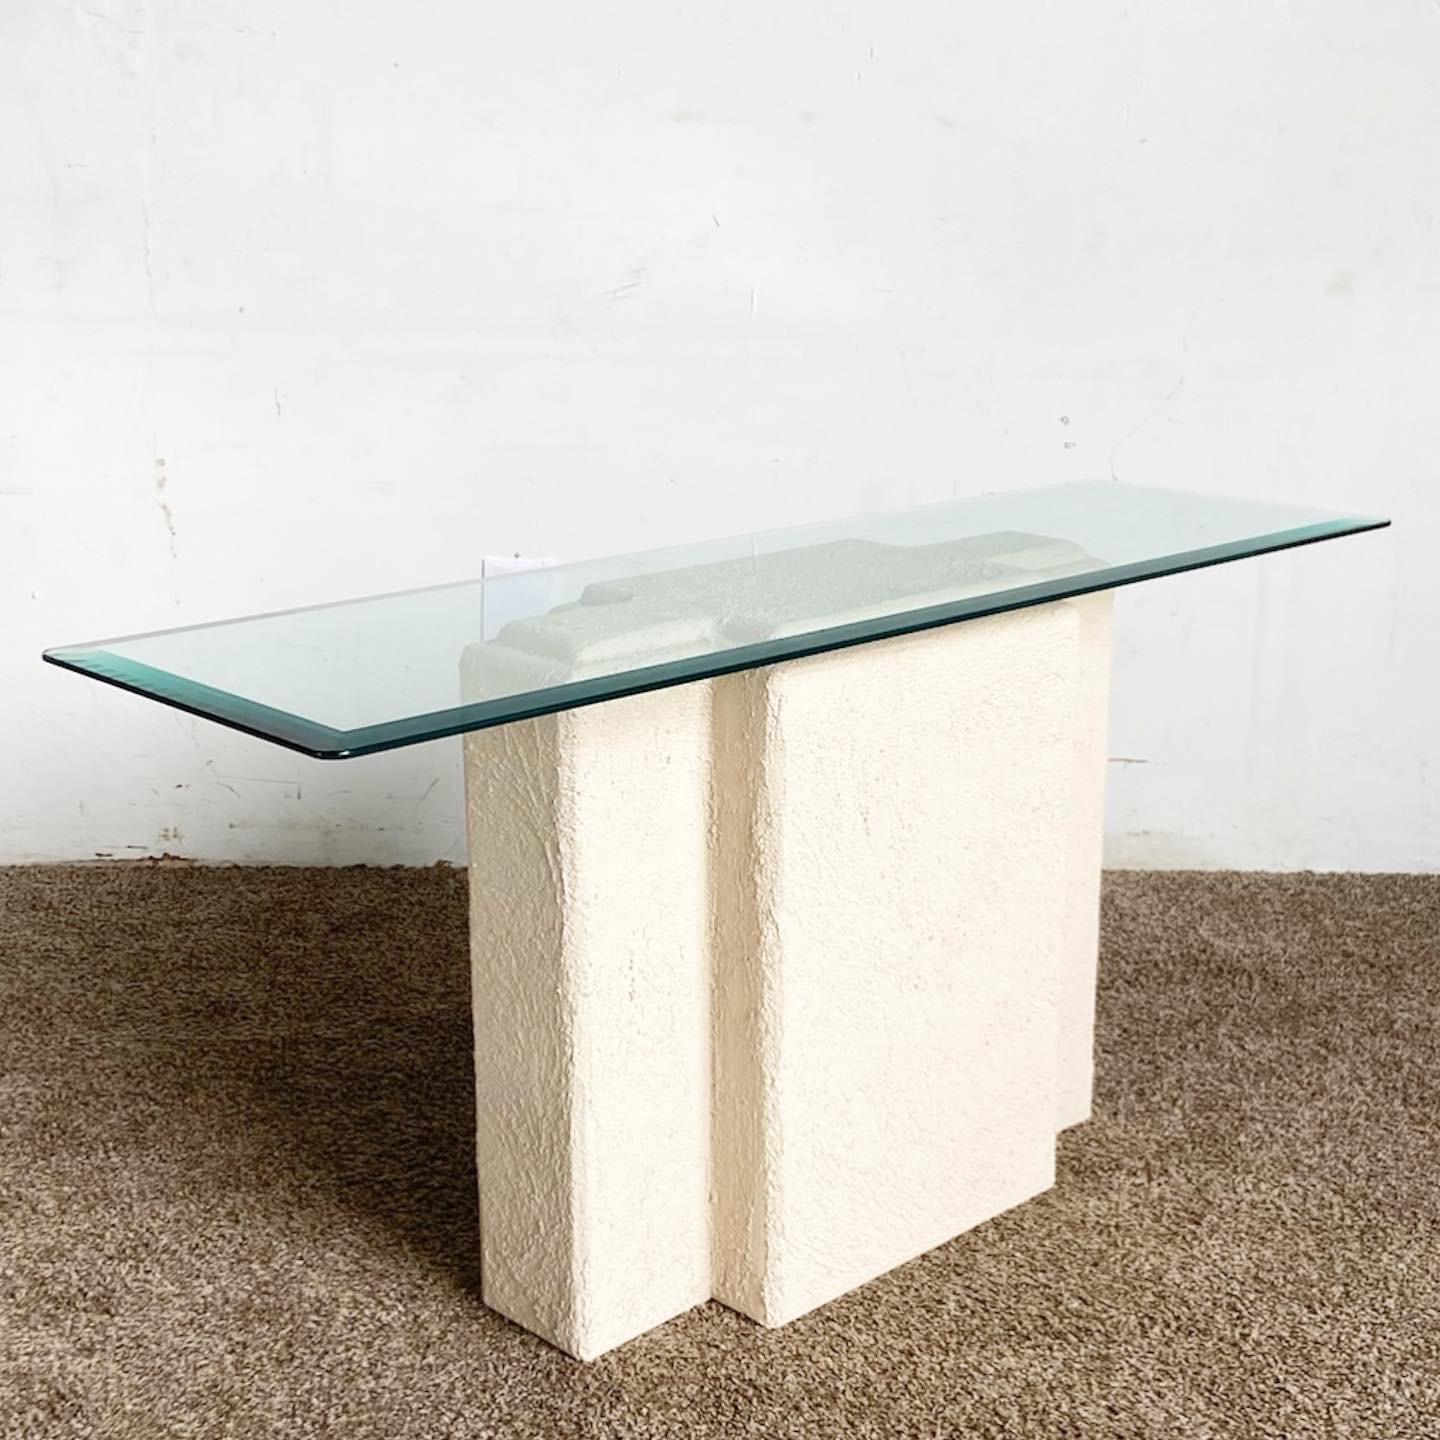 Discover our Postmodern Stucco Plaster Glass Top Console Table, blending a sculpted stucco base with a sleek glass top for an artistic and functional piece.

Unique sculpted cruciform base crafted from stucco-textured plaster.
Rectangular glass top